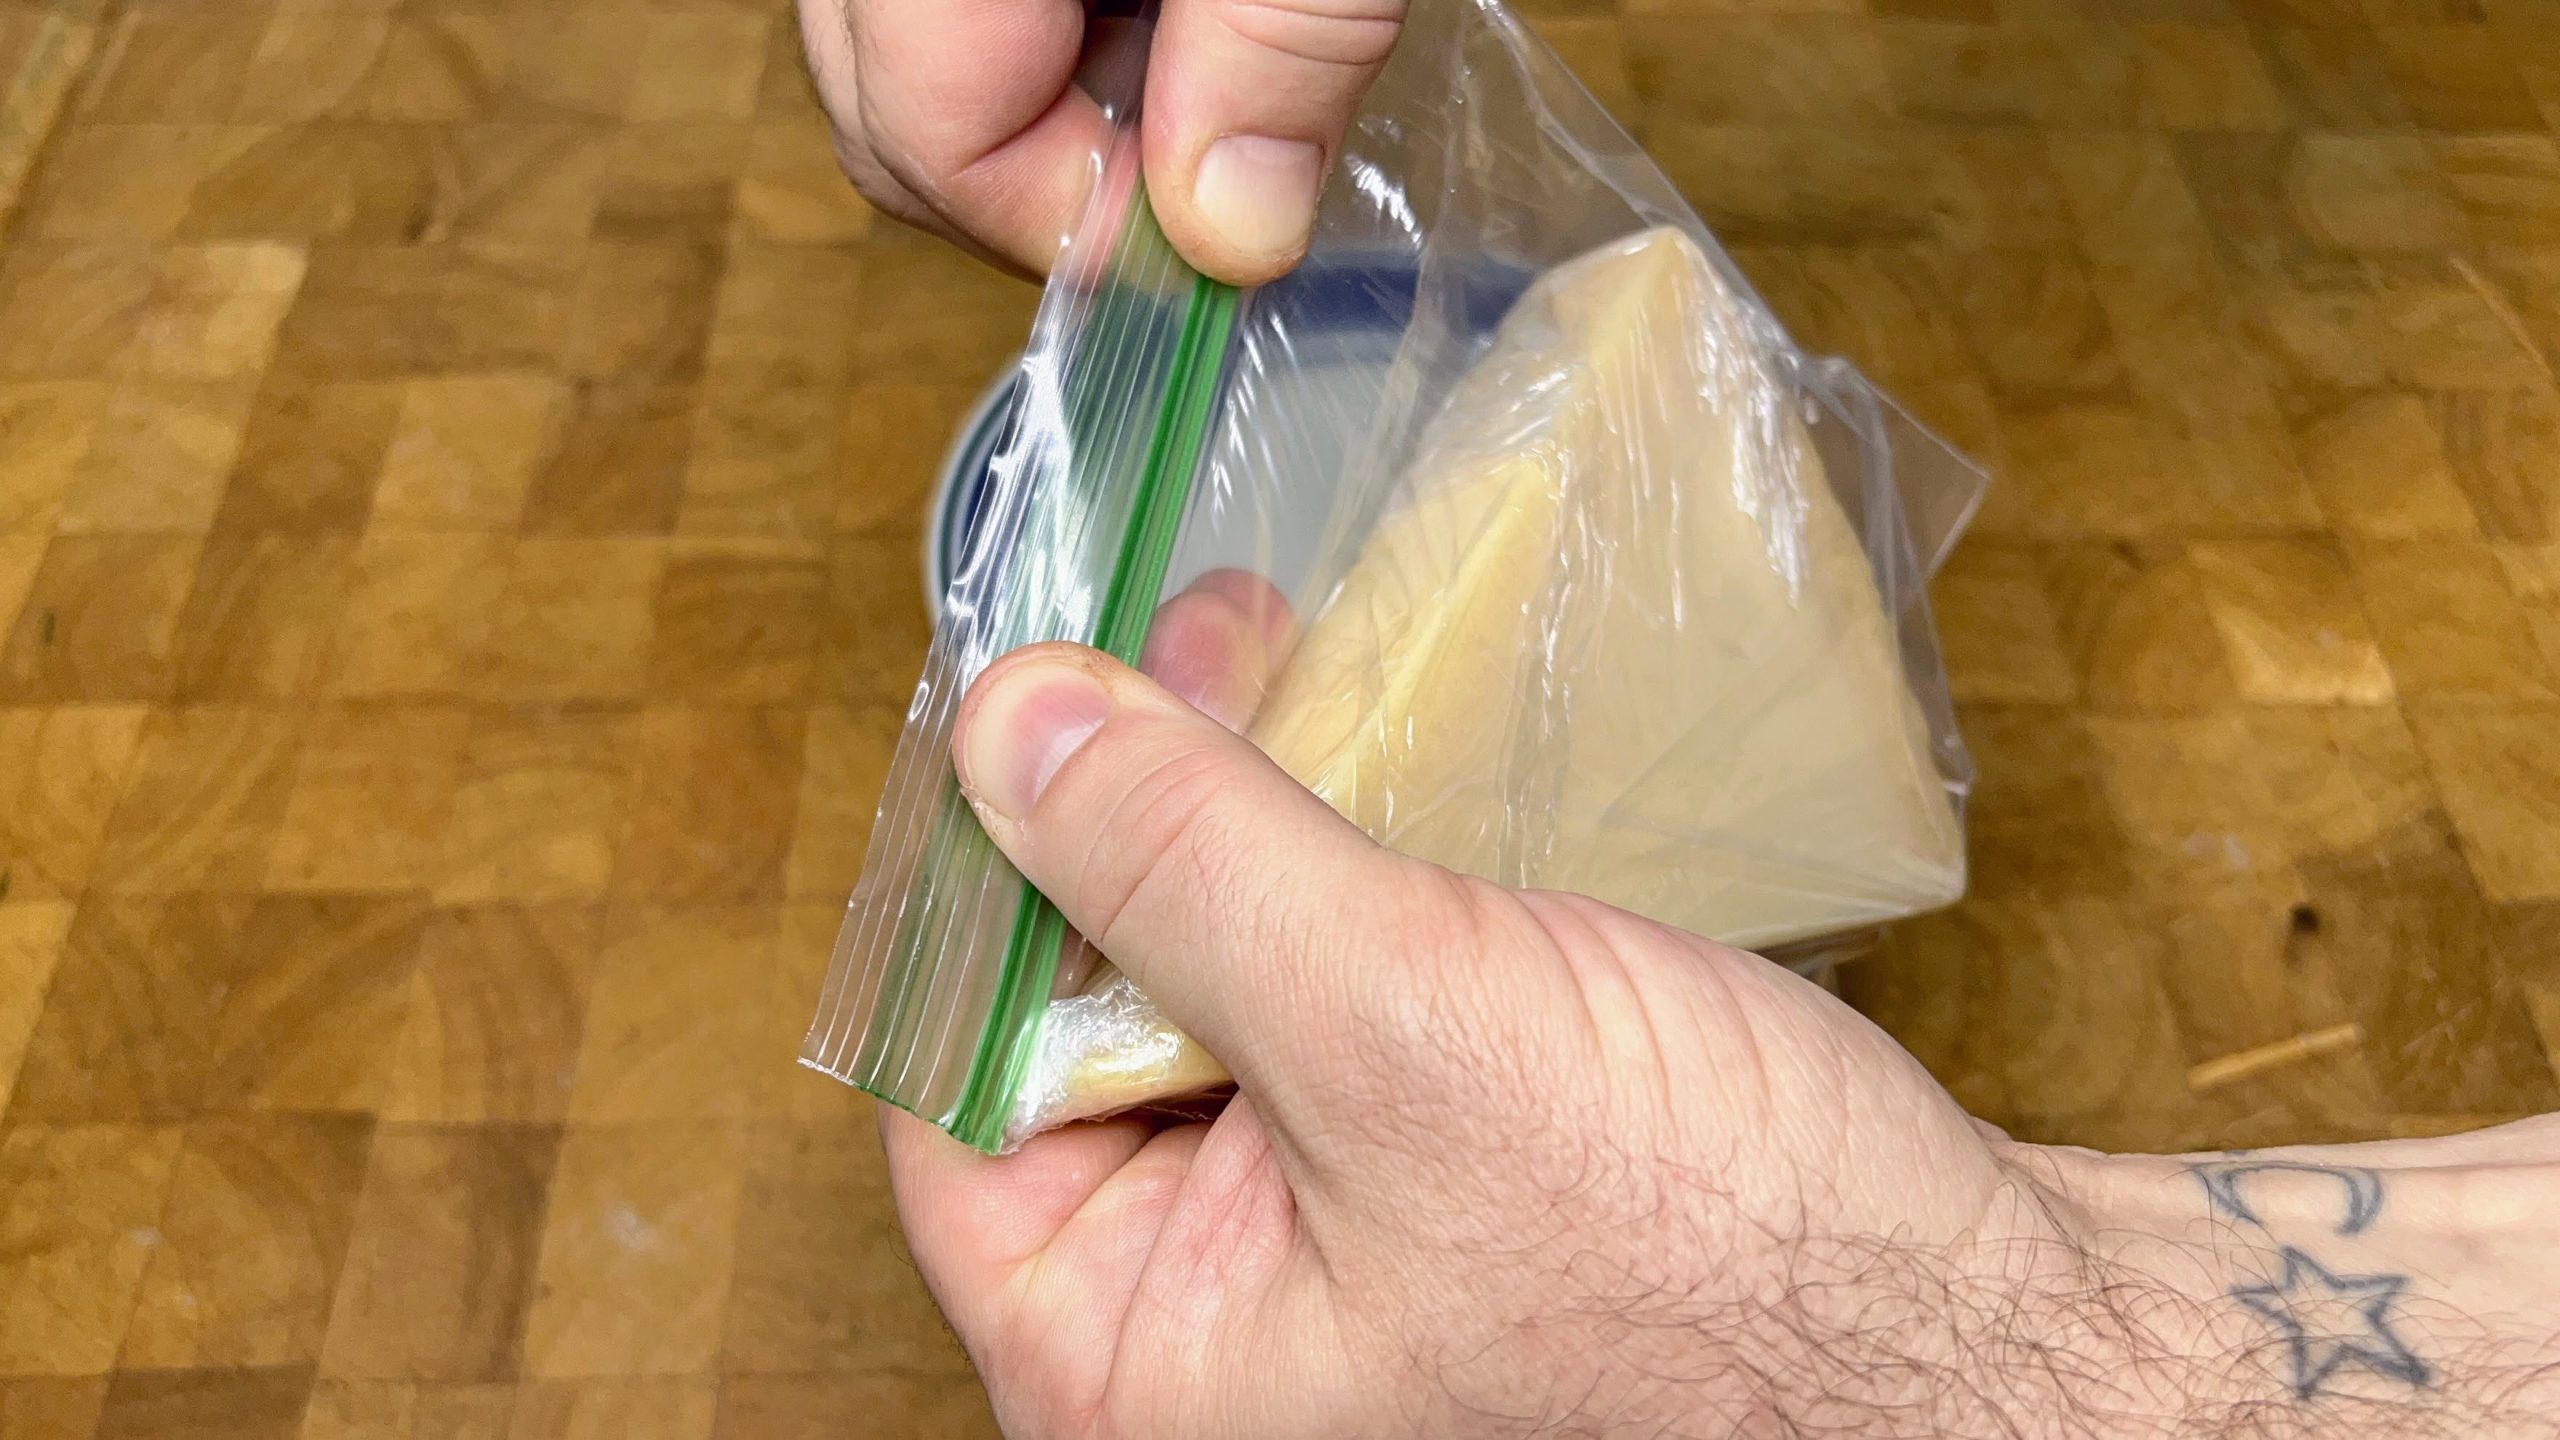 zipping freezer bag full of wrapped parmesan cheese